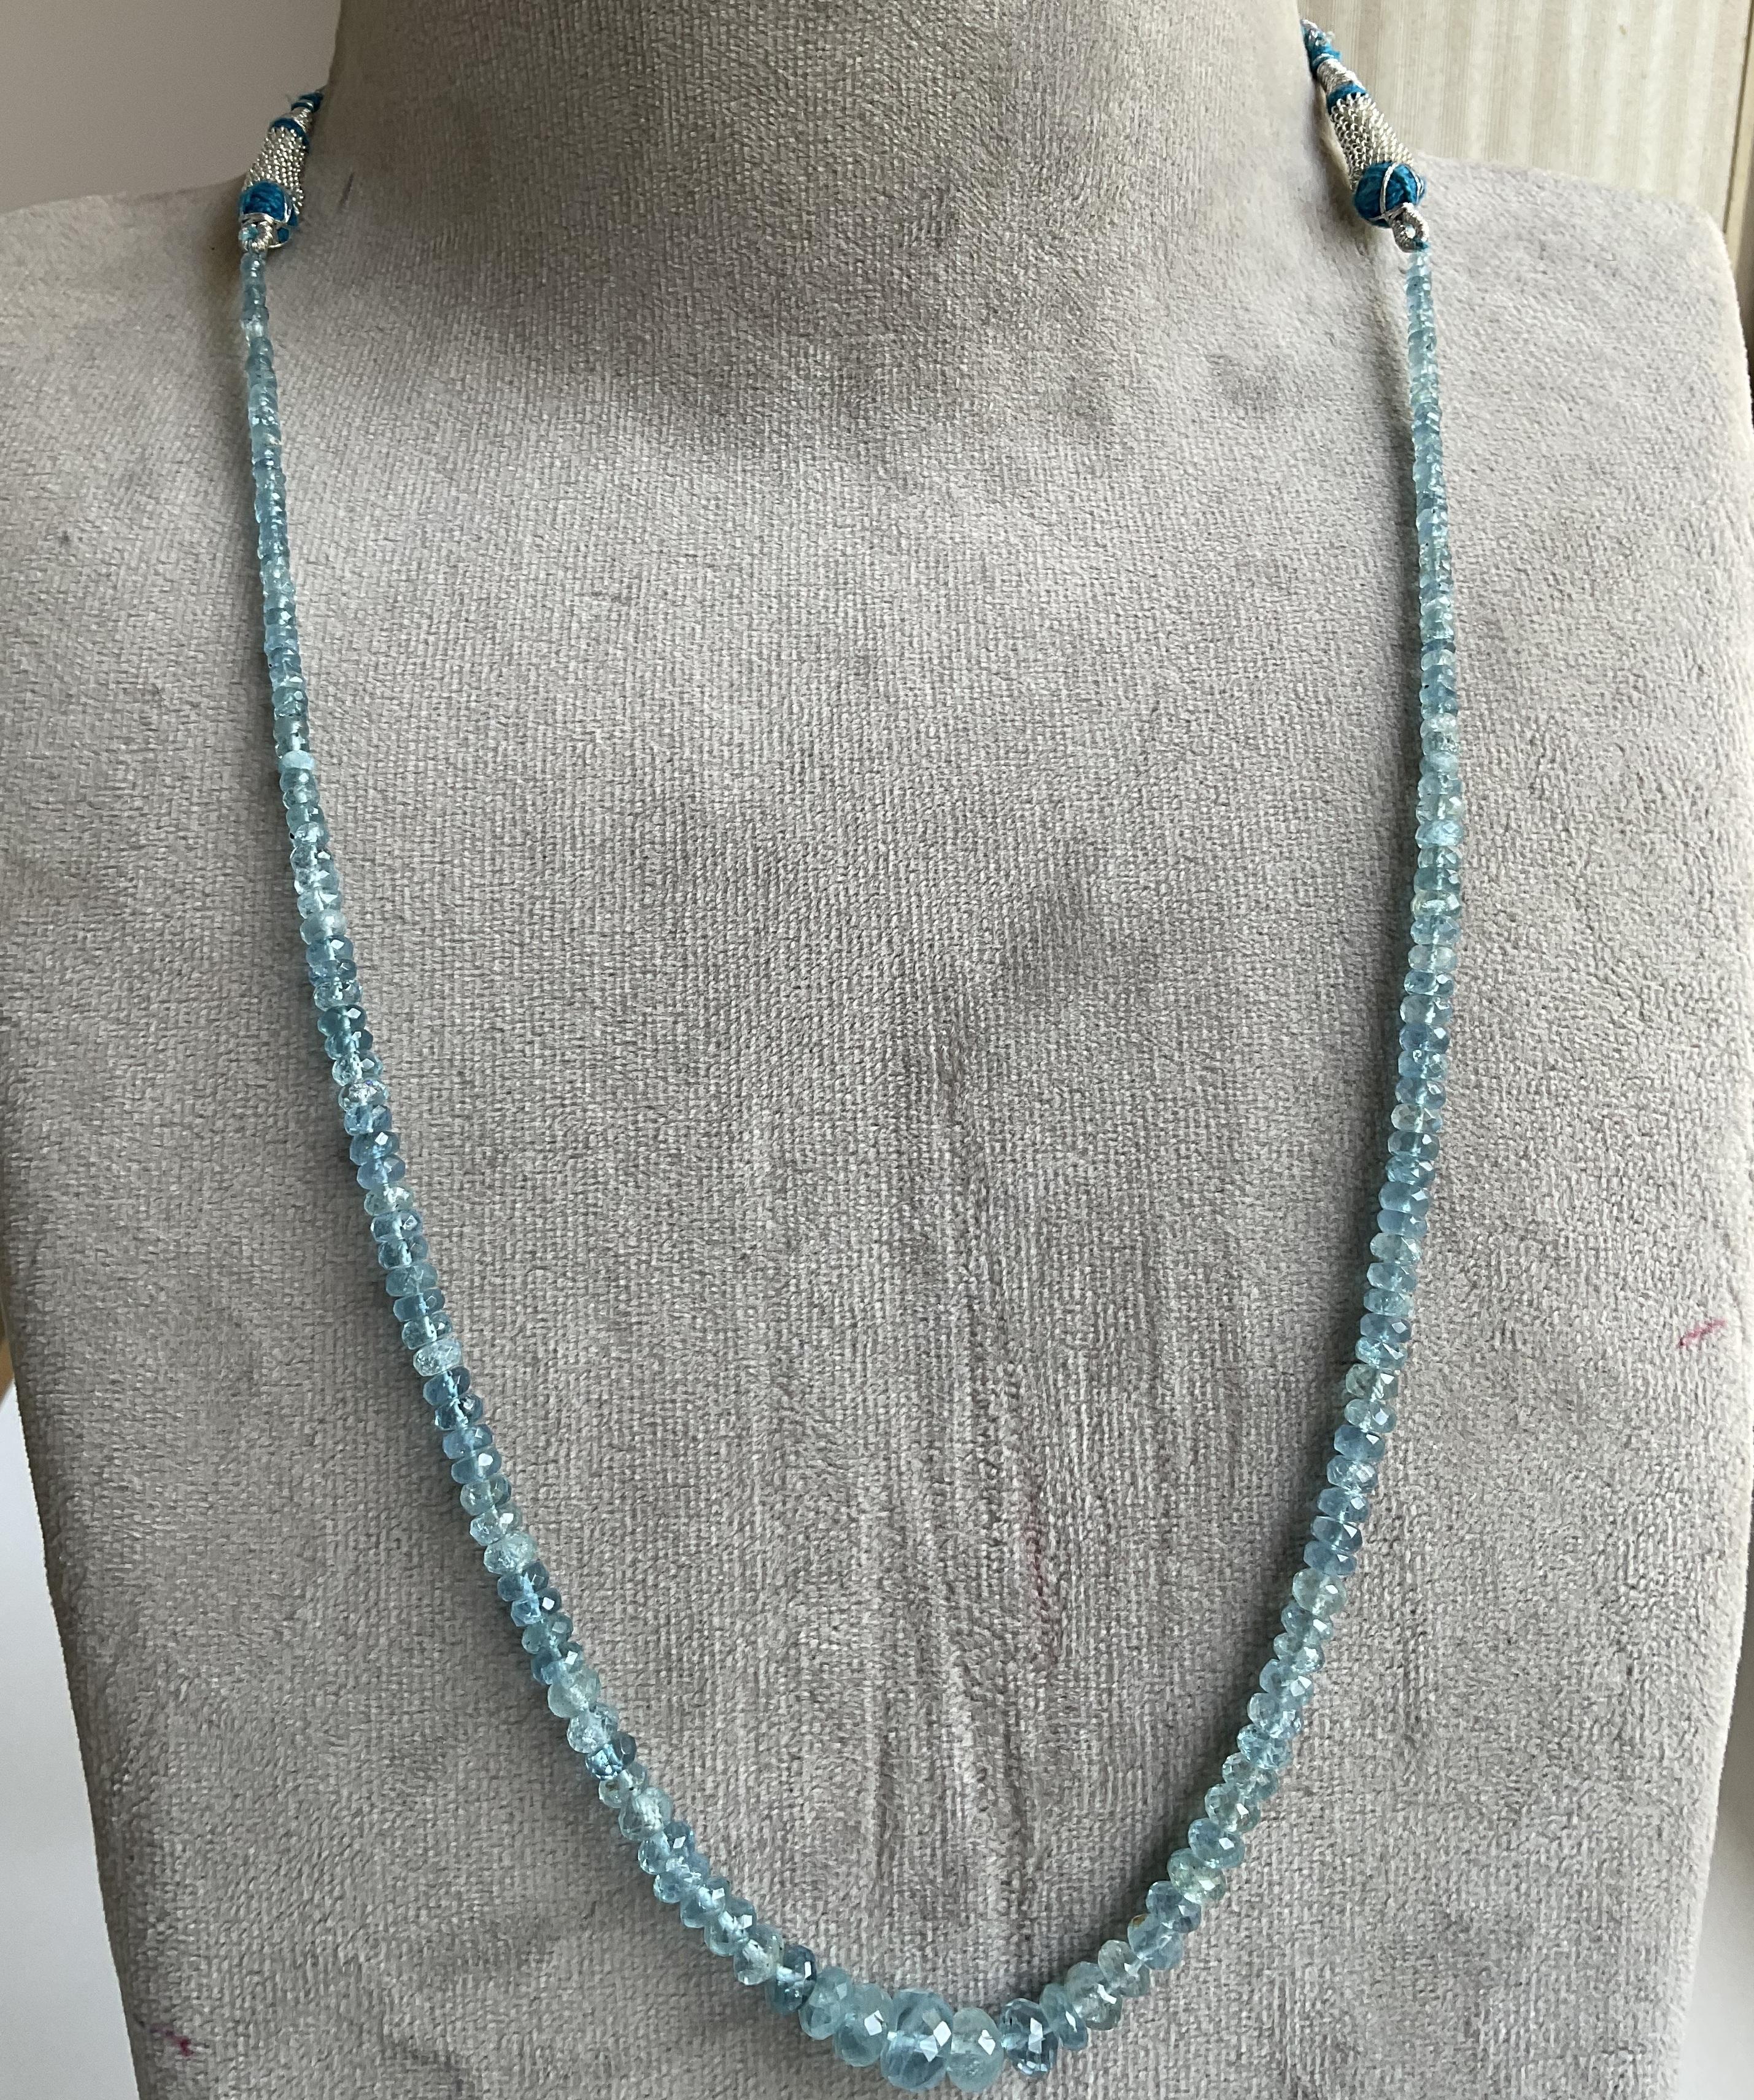 79.85 carats Aquamarine Beaded Necklace 1 Strand Faceted Beads good Quality Gem

gemstone - Aquamarine 
weight - 79.85 carats
size - 2.5 To 9 mm
quantity - 1 Strand
Length : 18 Inch.